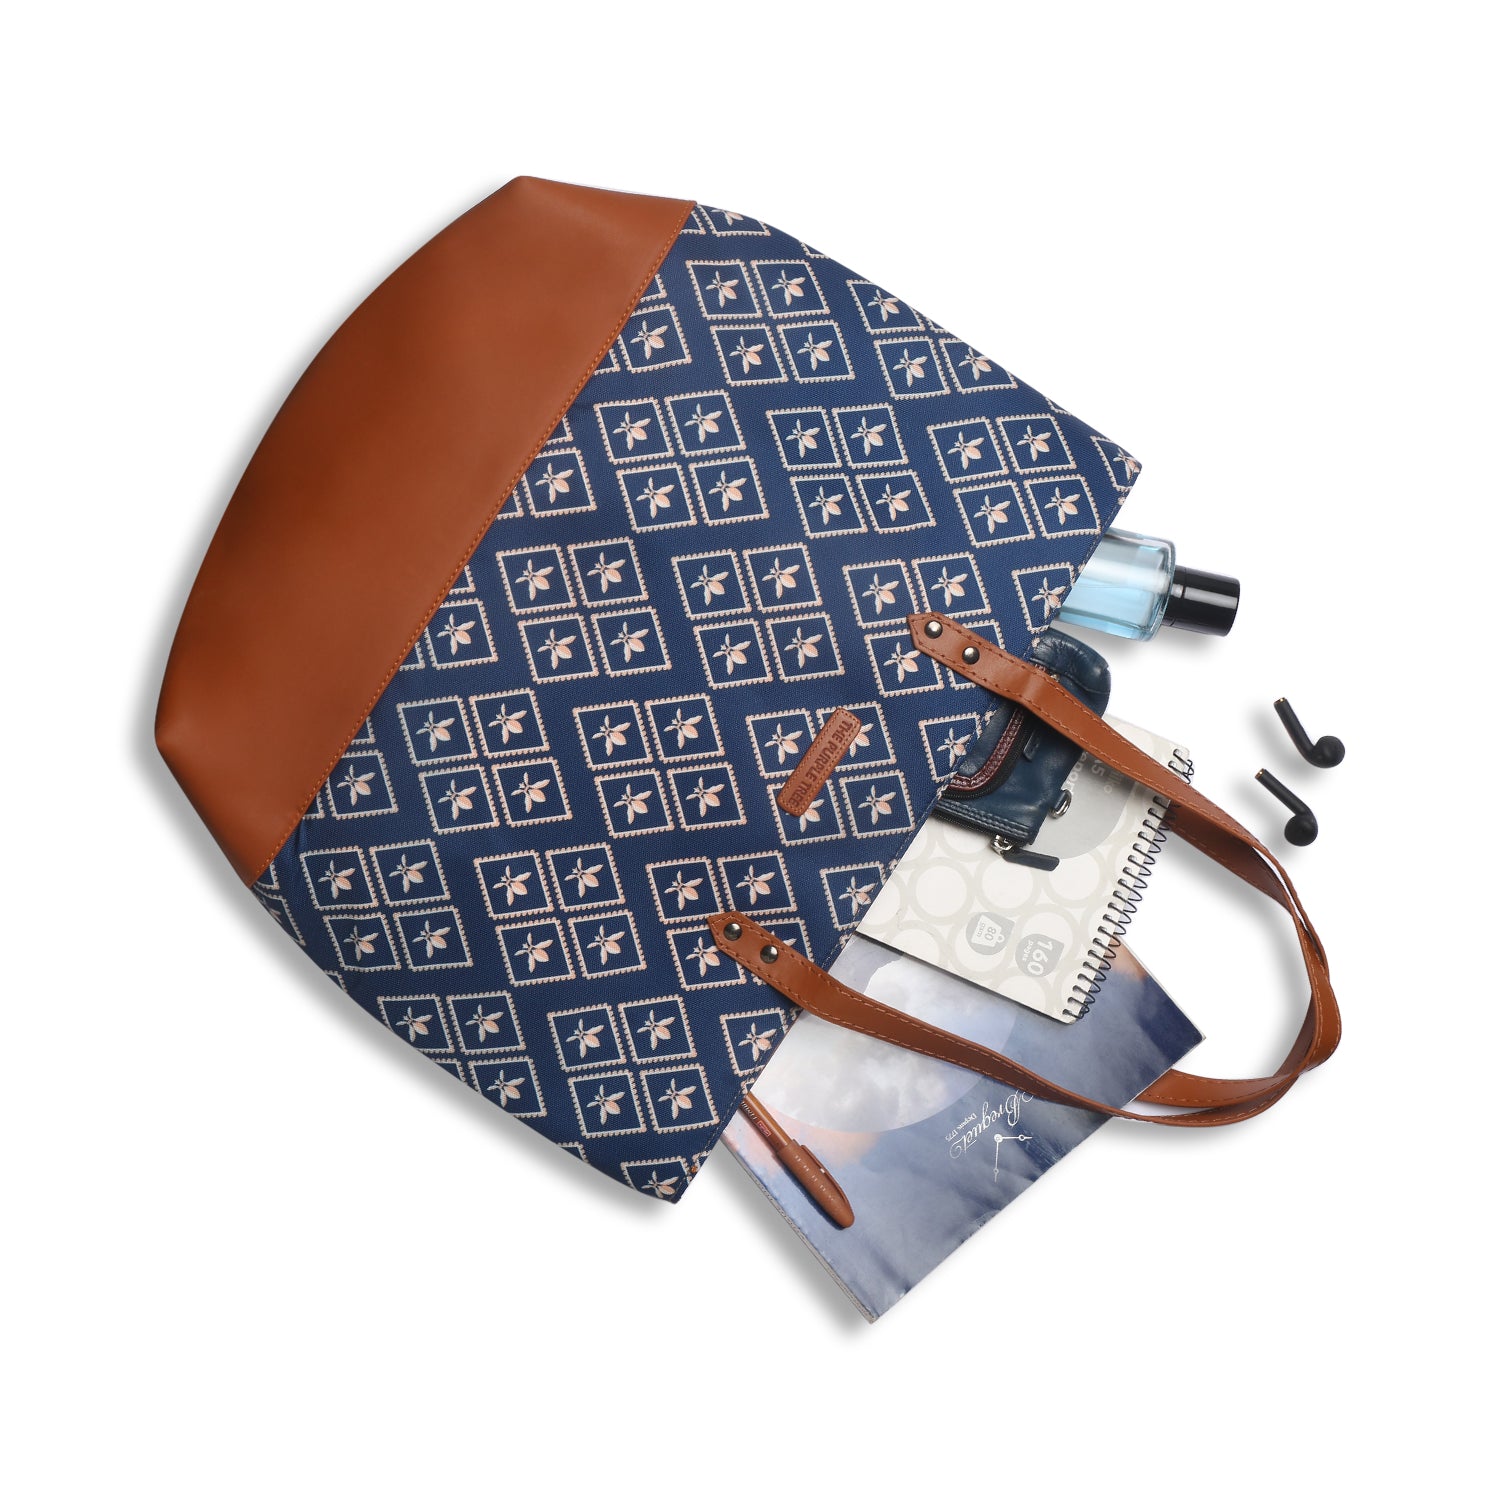 Blue and brown tote bag resting on wooden chair